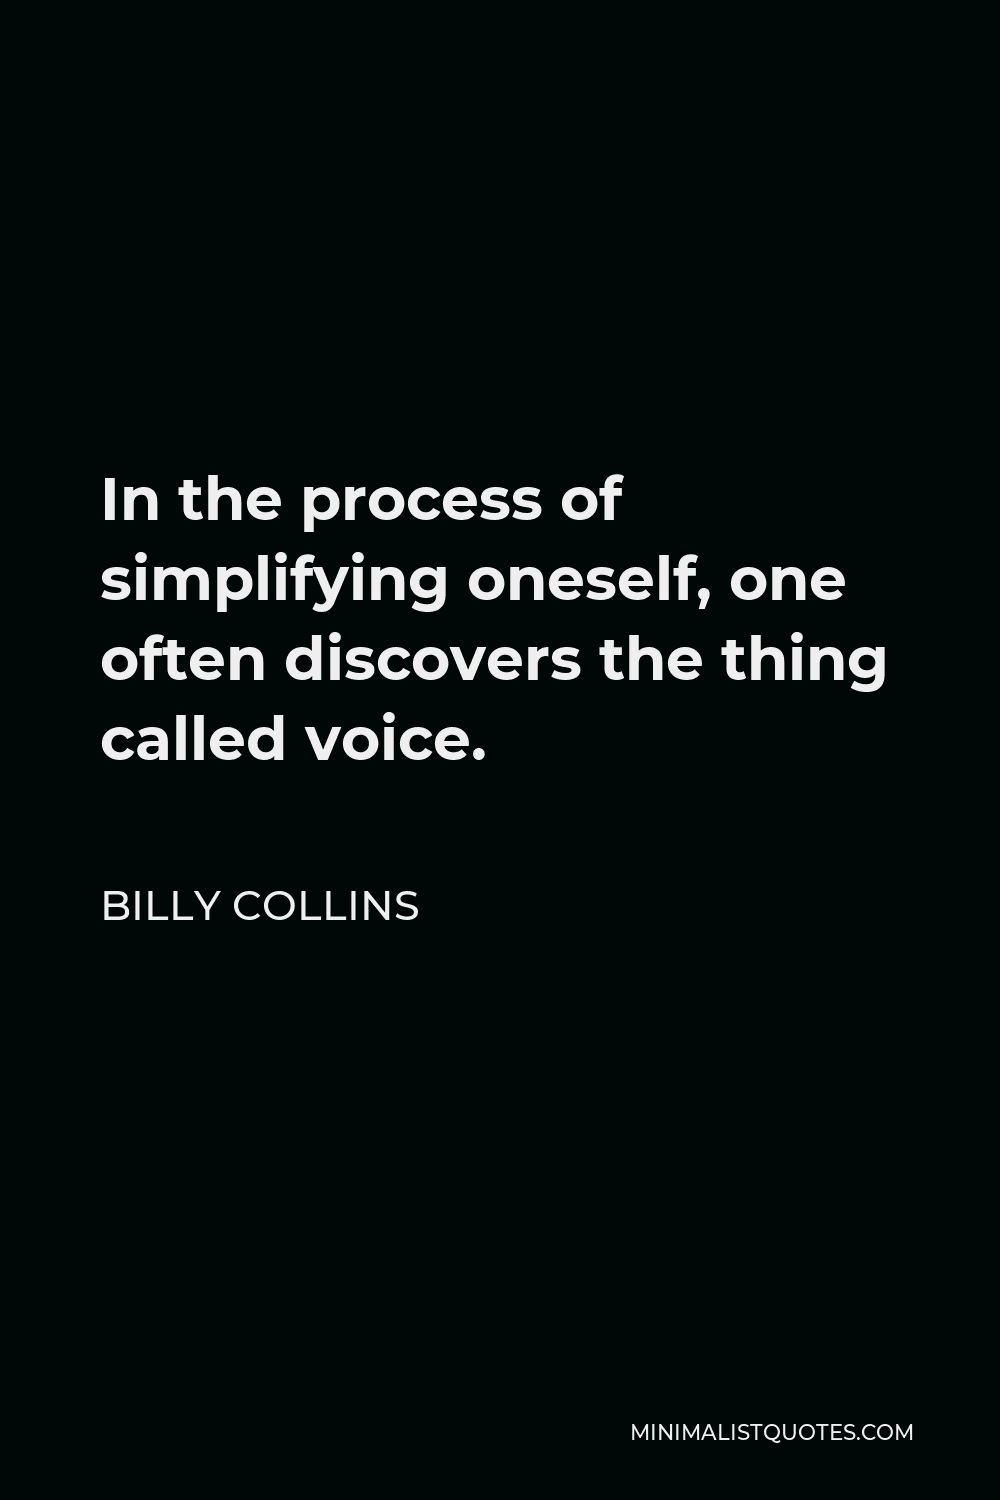 Billy Collins Quote - In the process of simplifying oneself, one often discovers the thing called voice.